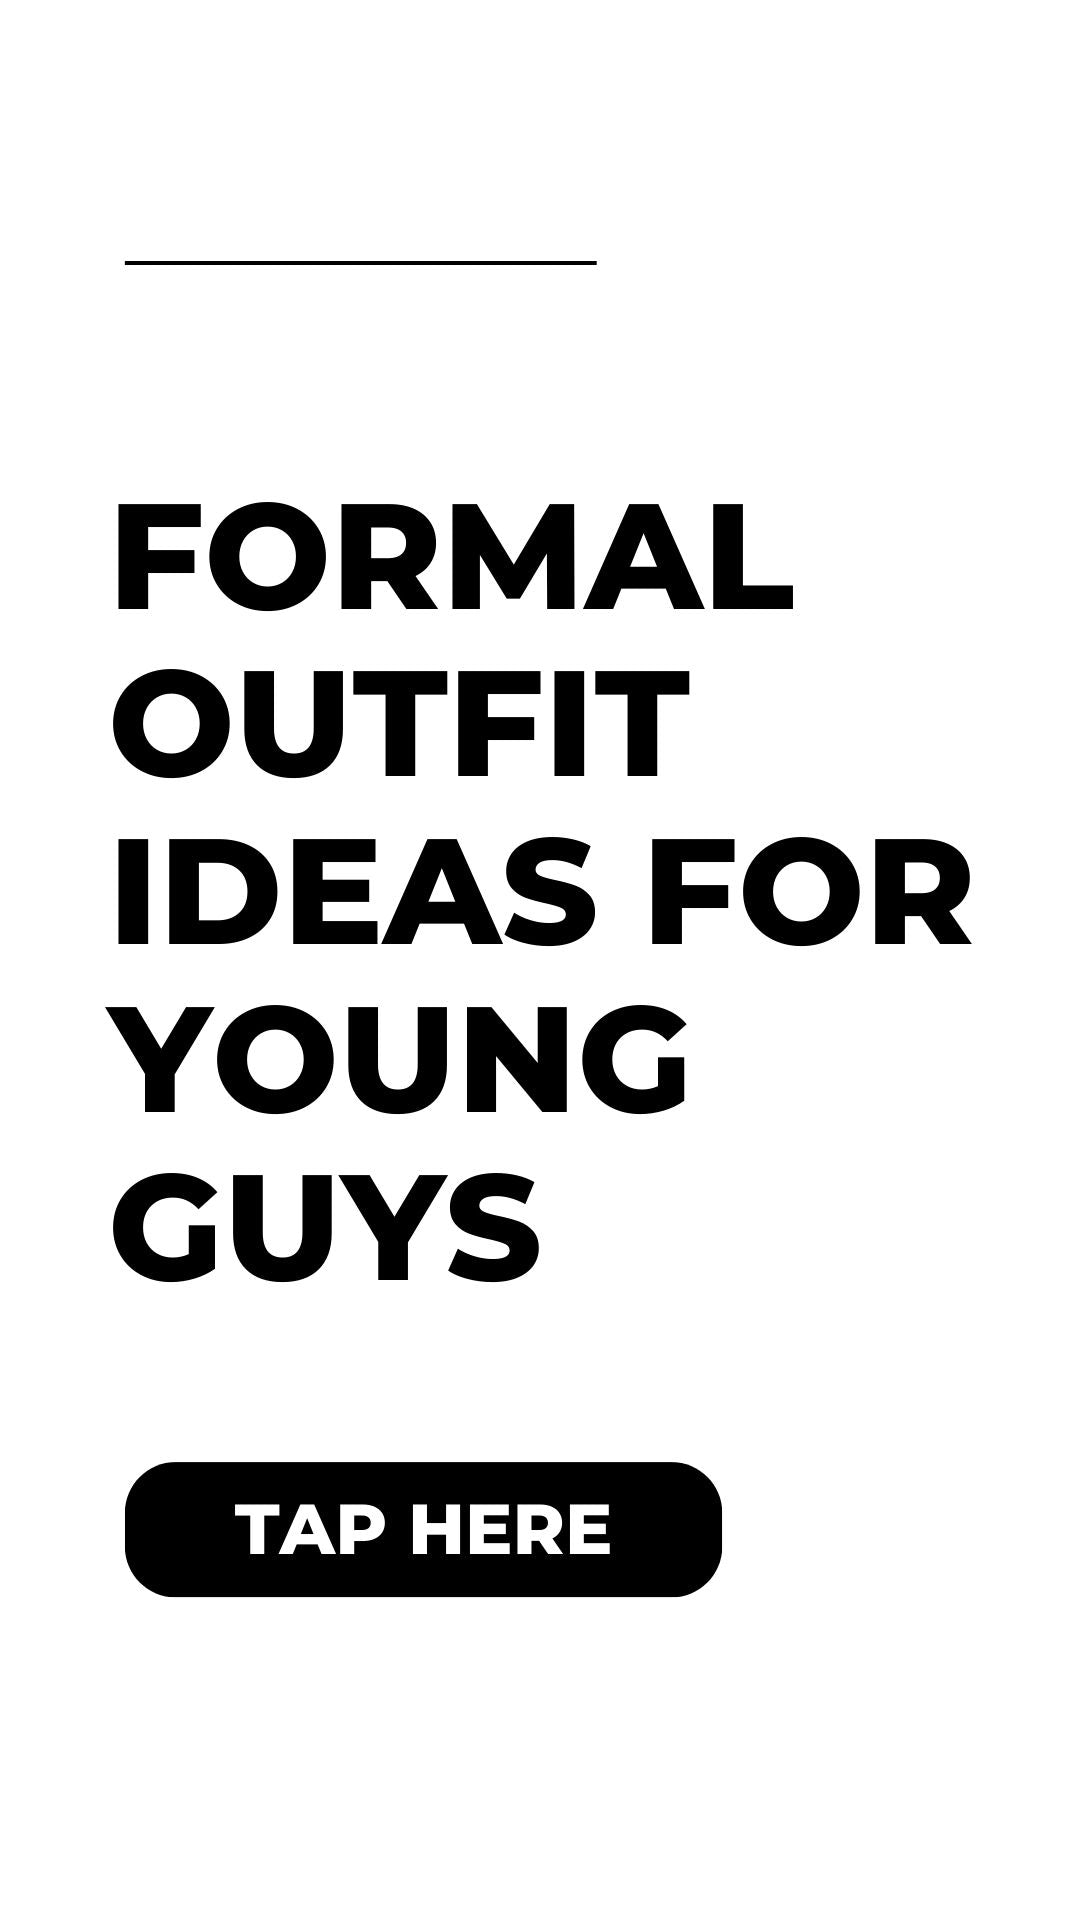 FORMAL OUTFITS FOR MEN